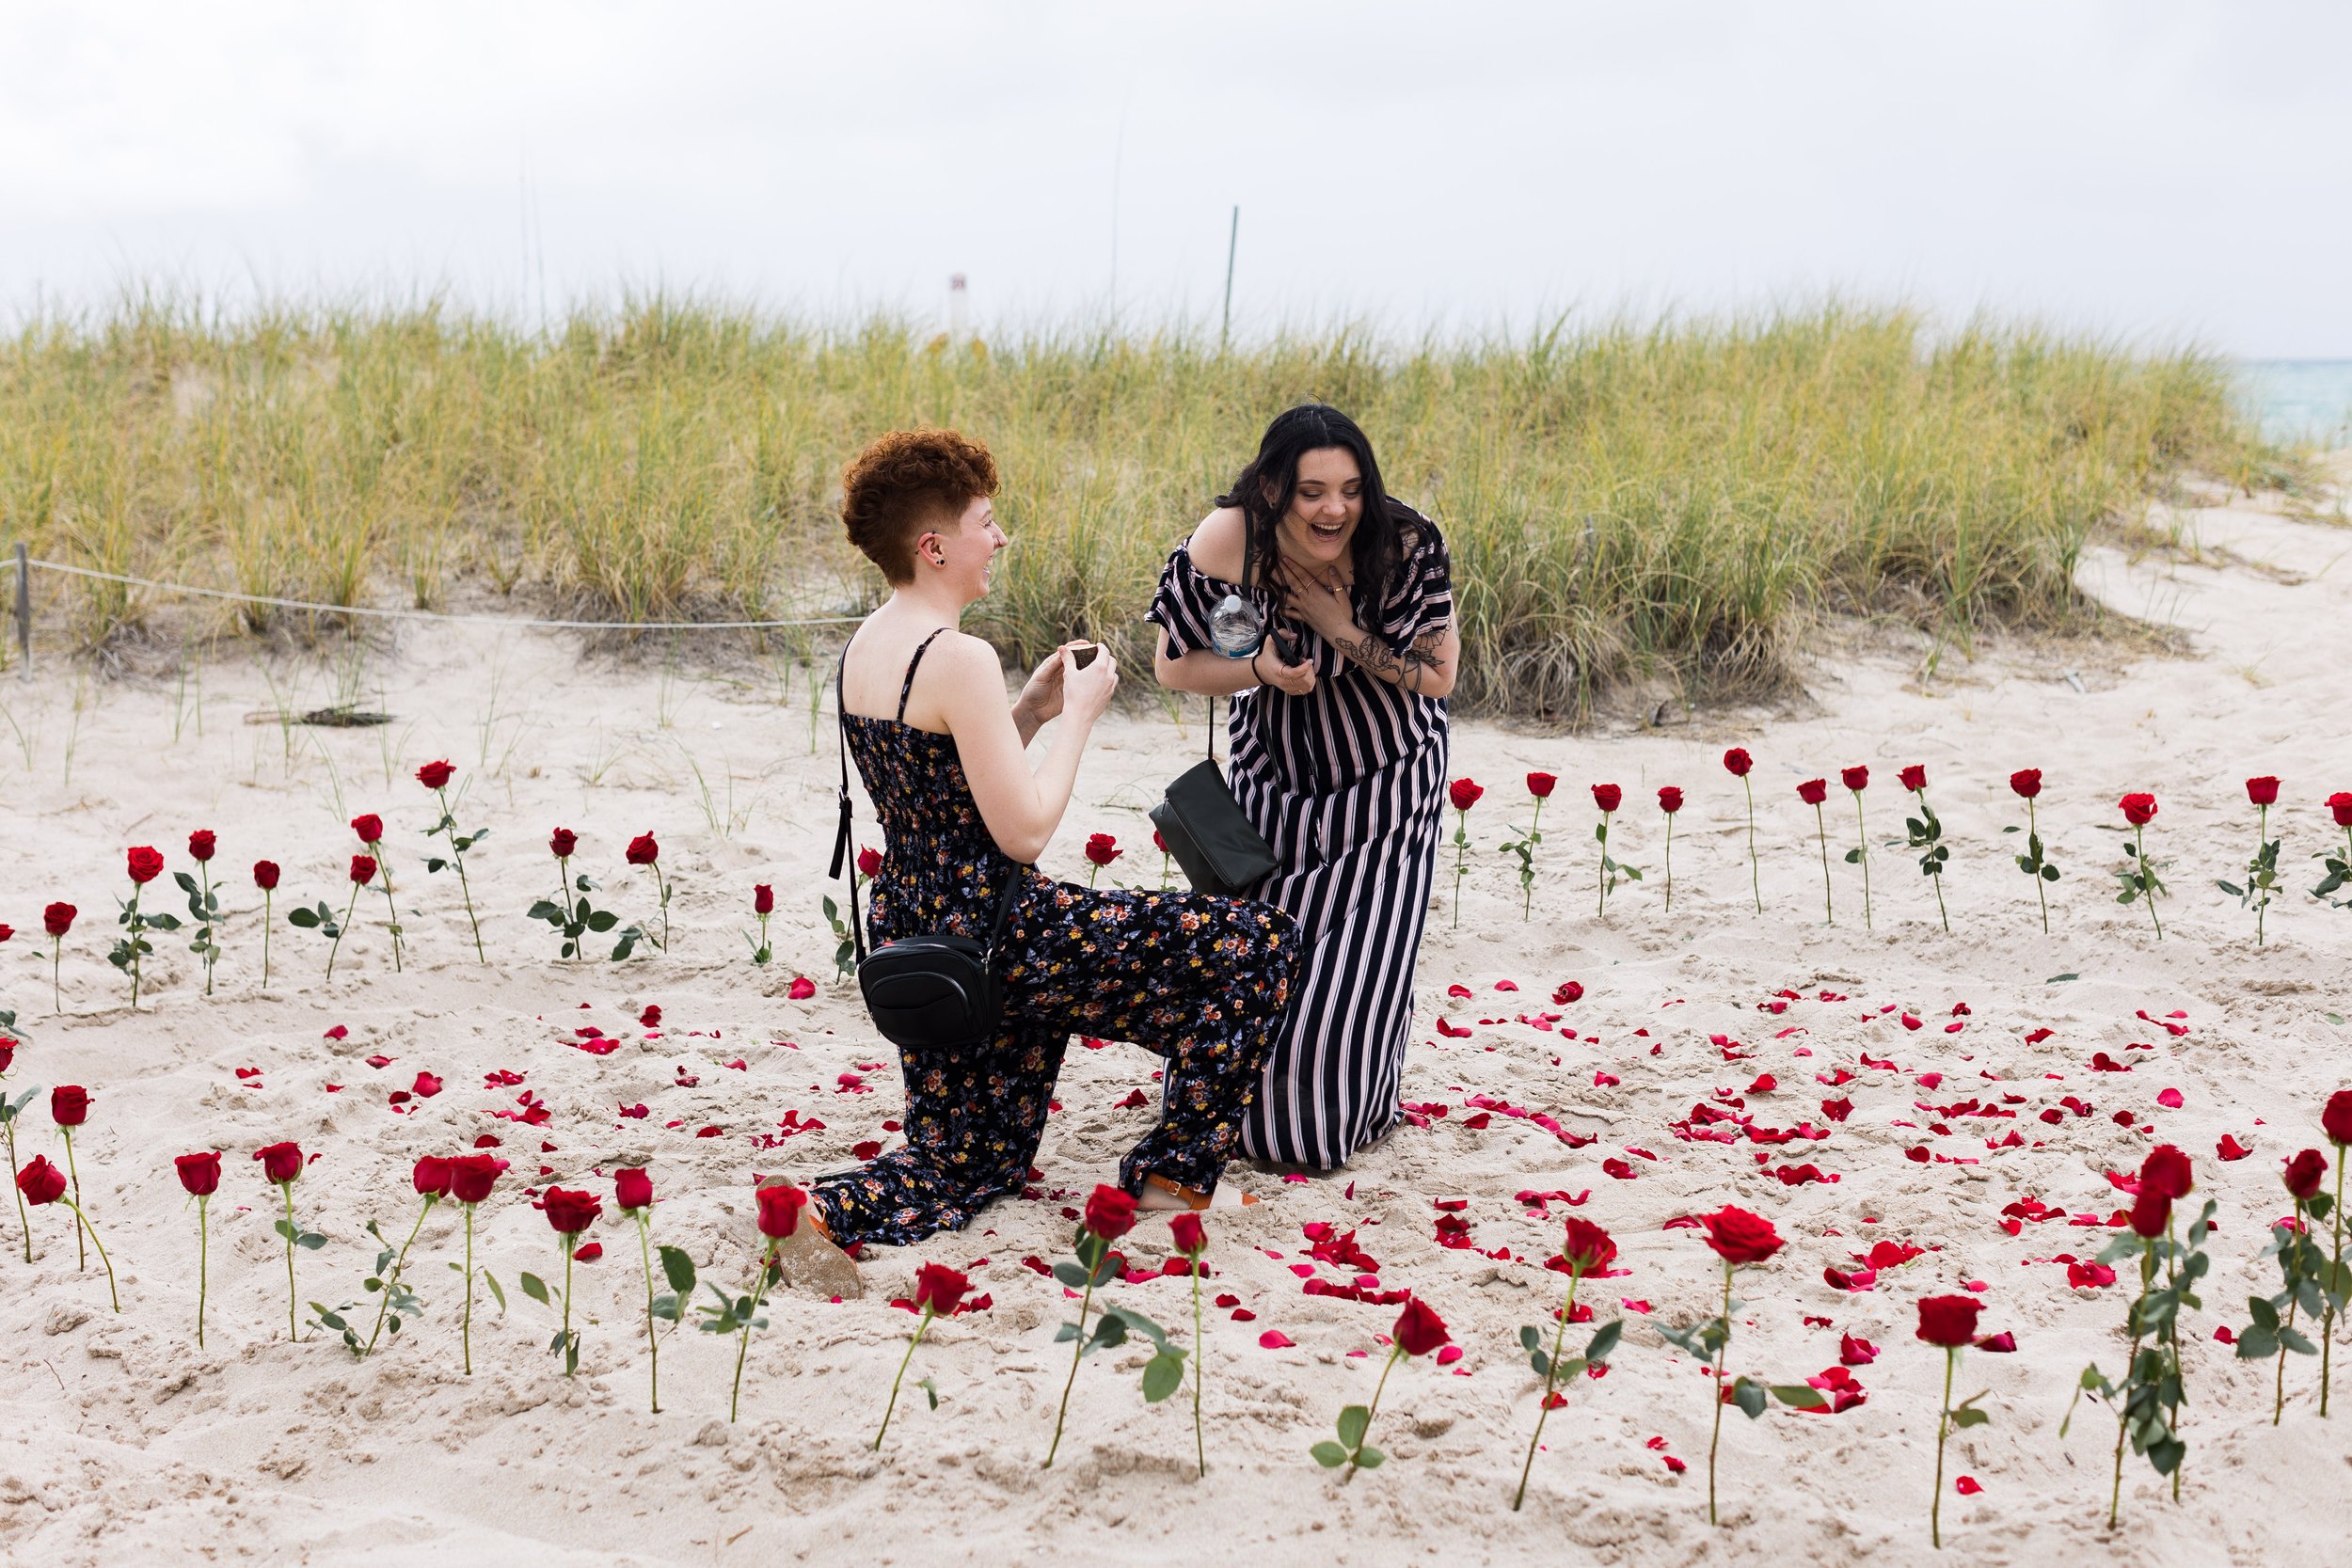 Lauderdale-by-the-Sea-Same-Sex-Suprise-Proposal-LGBTQ-Engagement-Photographer-3475.jpg